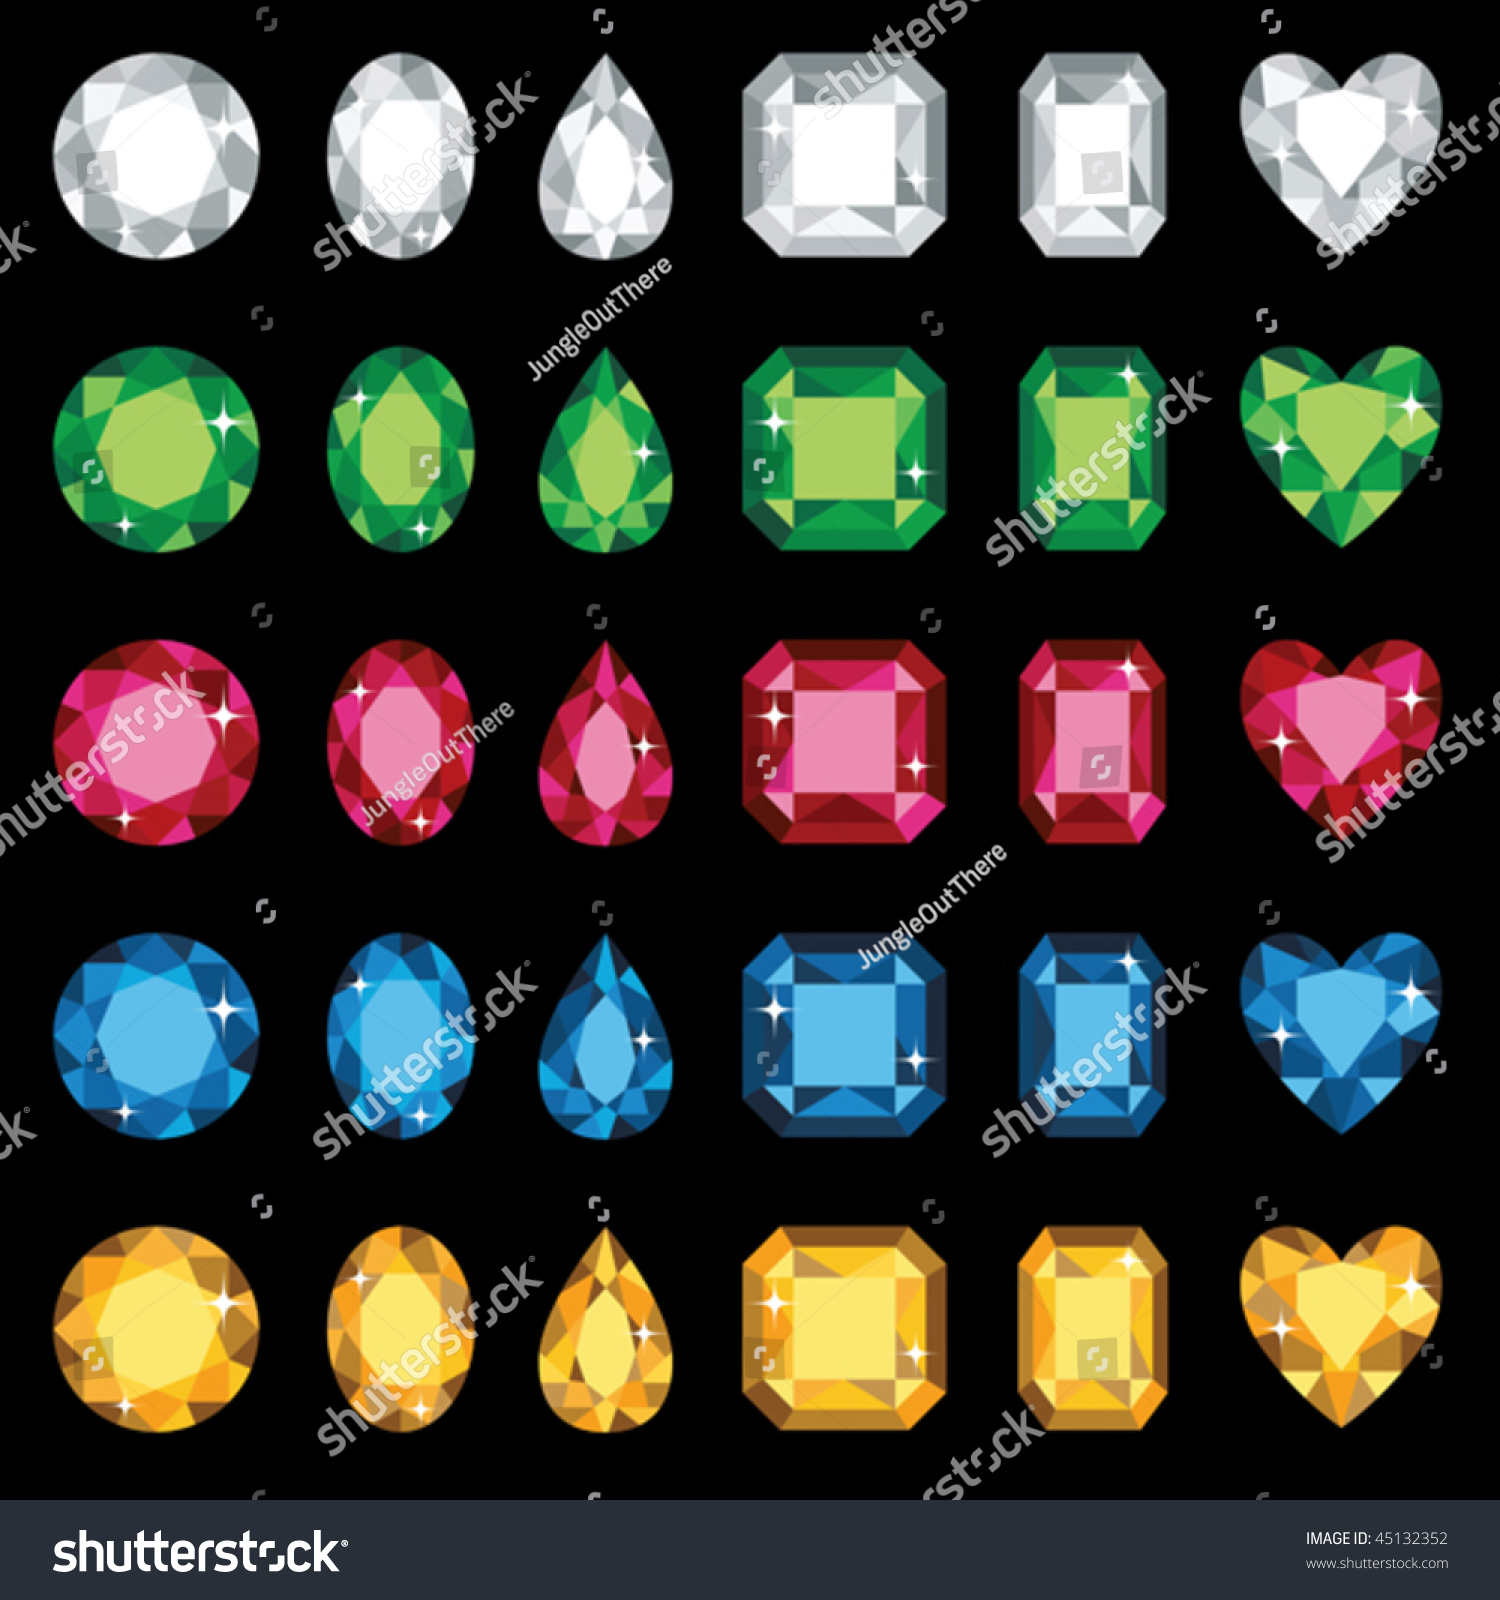 SVG of Vector illustration of colorful gemstones in six different shapes. No gradients used. svg